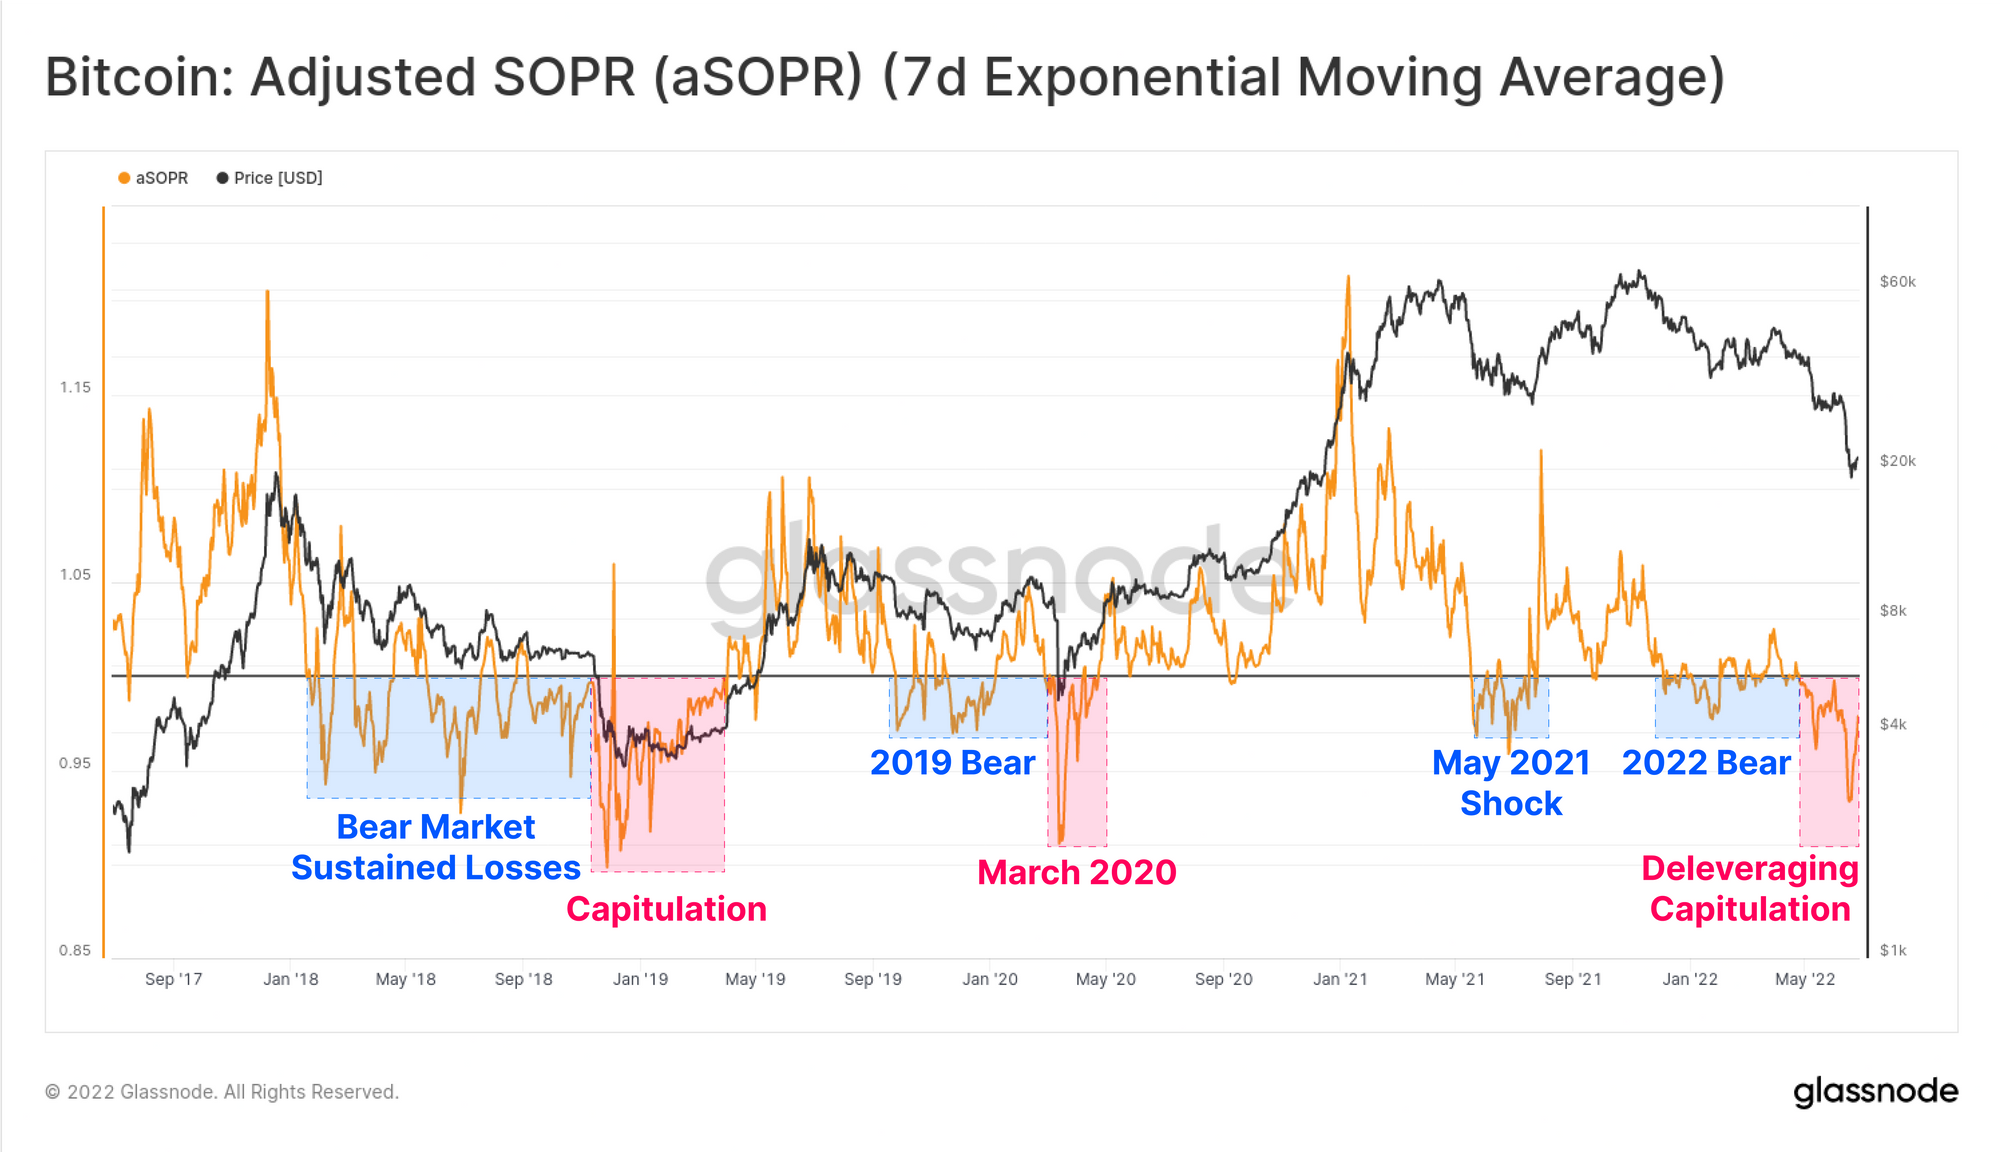 Bitcoin: Adjusted SOPR (aSOPR) (7d Exponential Moving Average)